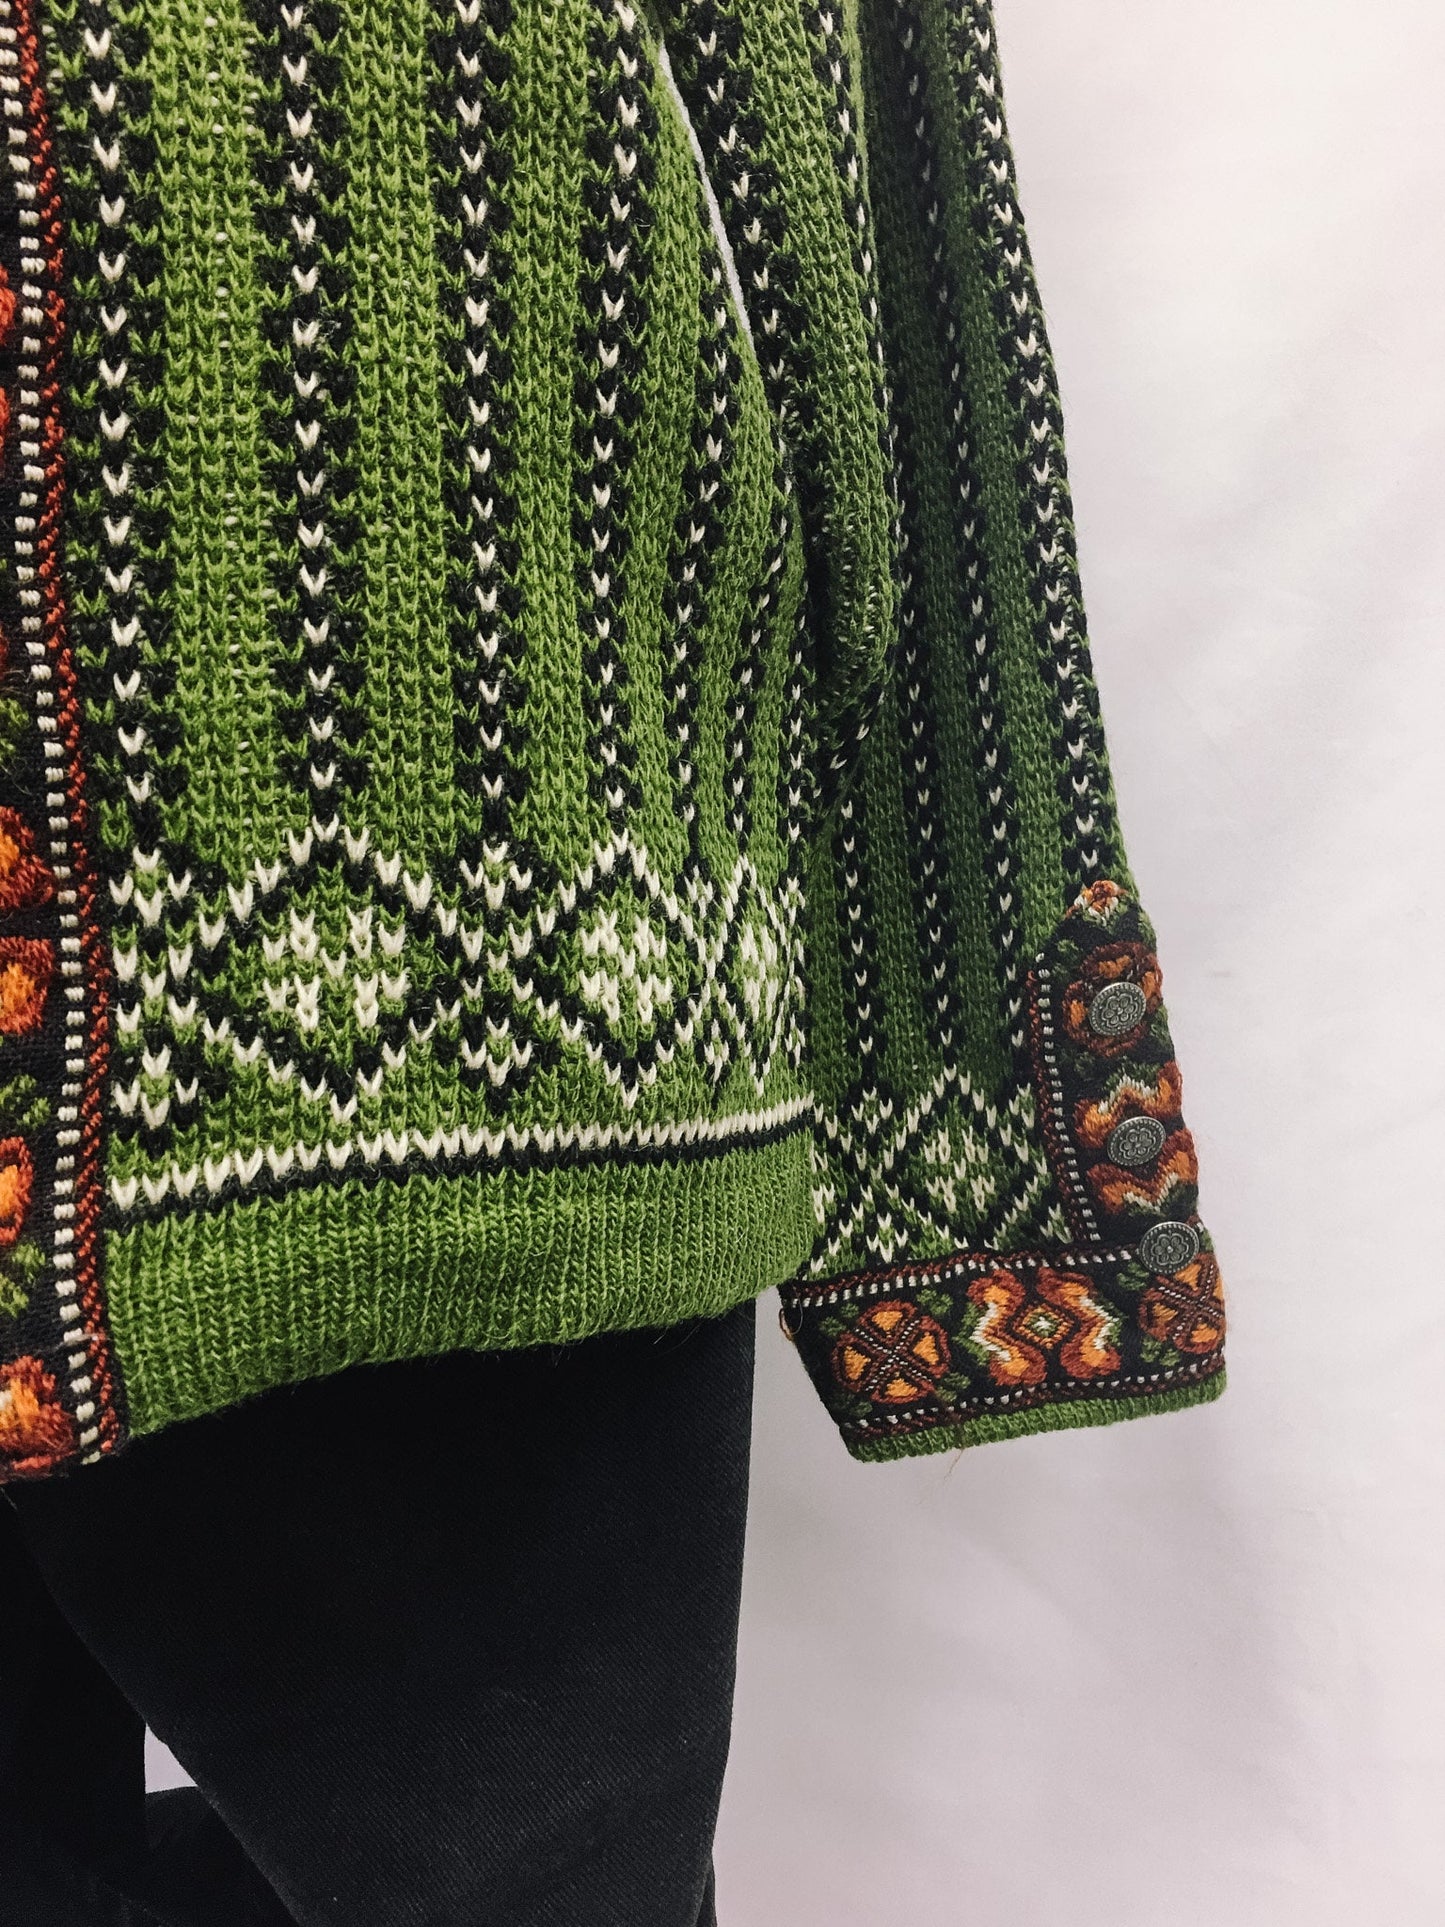 90s Nordstrikk Nordic Green Embroidered Wool Cardigan With Metal Clasp Enclosure, Vintage Wool Nordic Sweater, Made in Norway